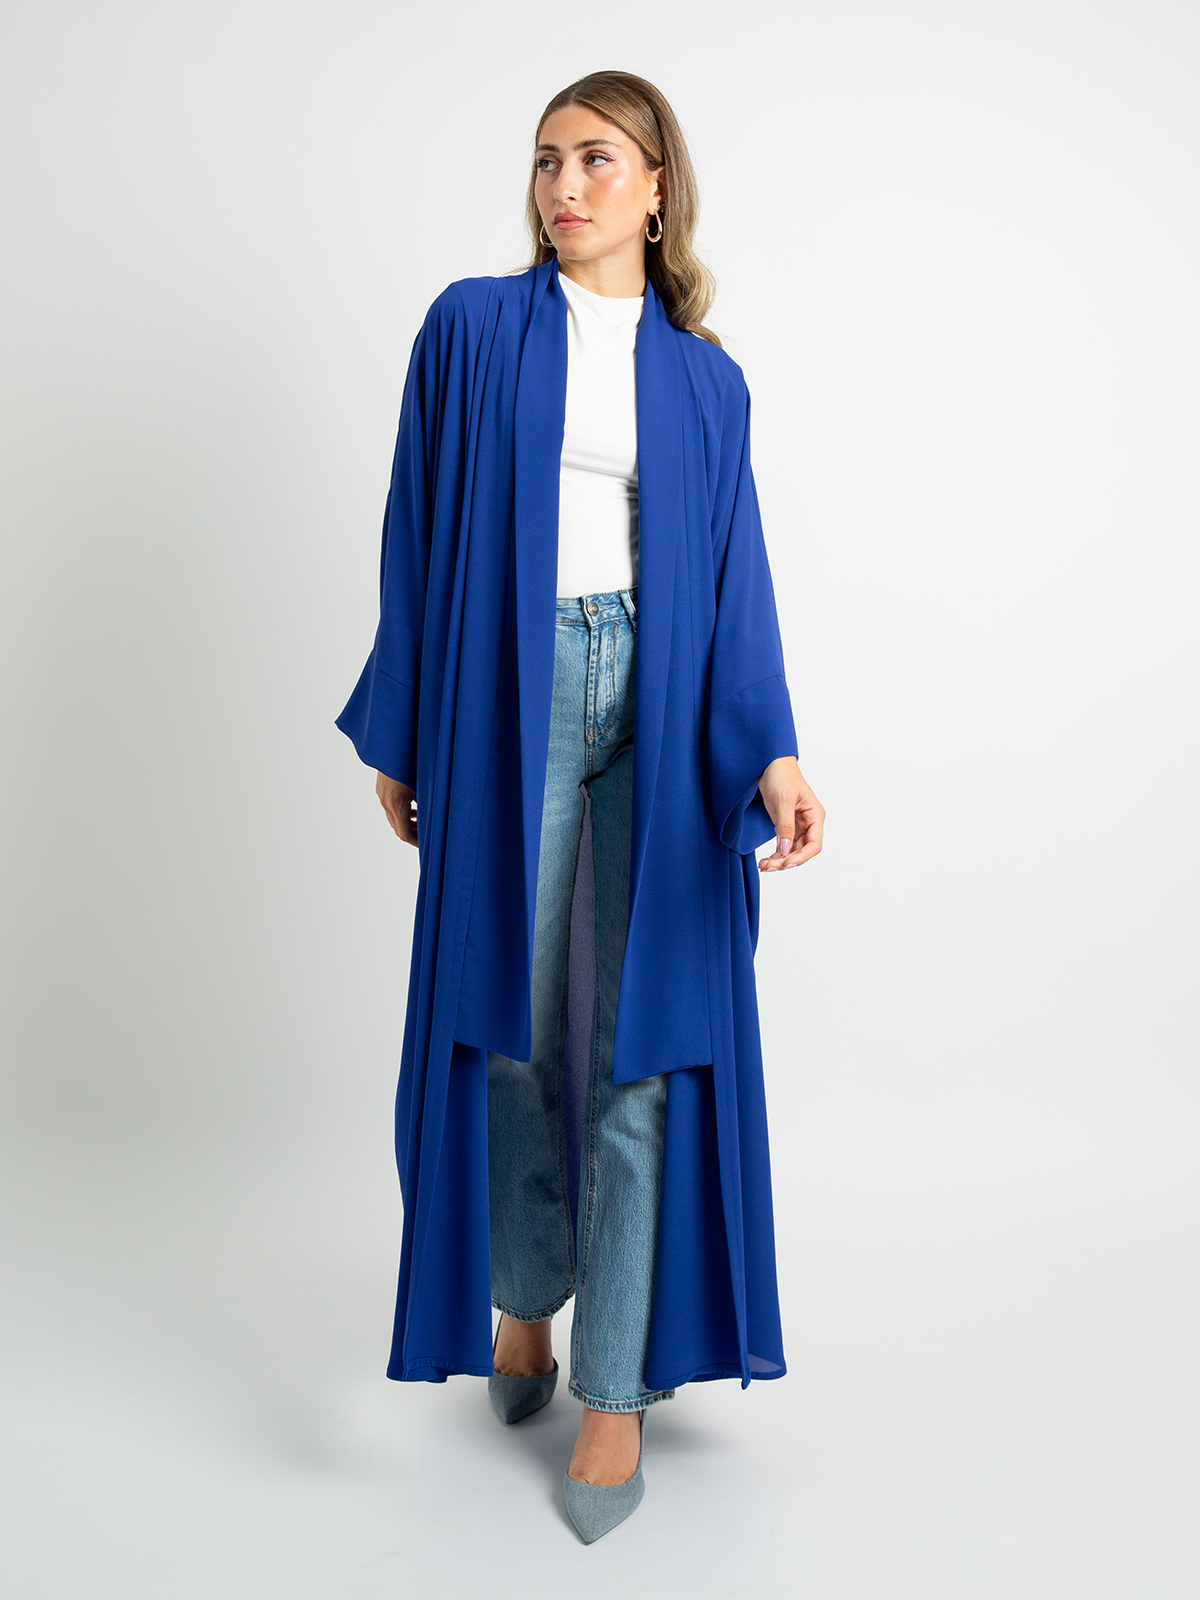 Indigo Blue - Flowstyle Wide-Fit Long Open Abaya in Light Fabric